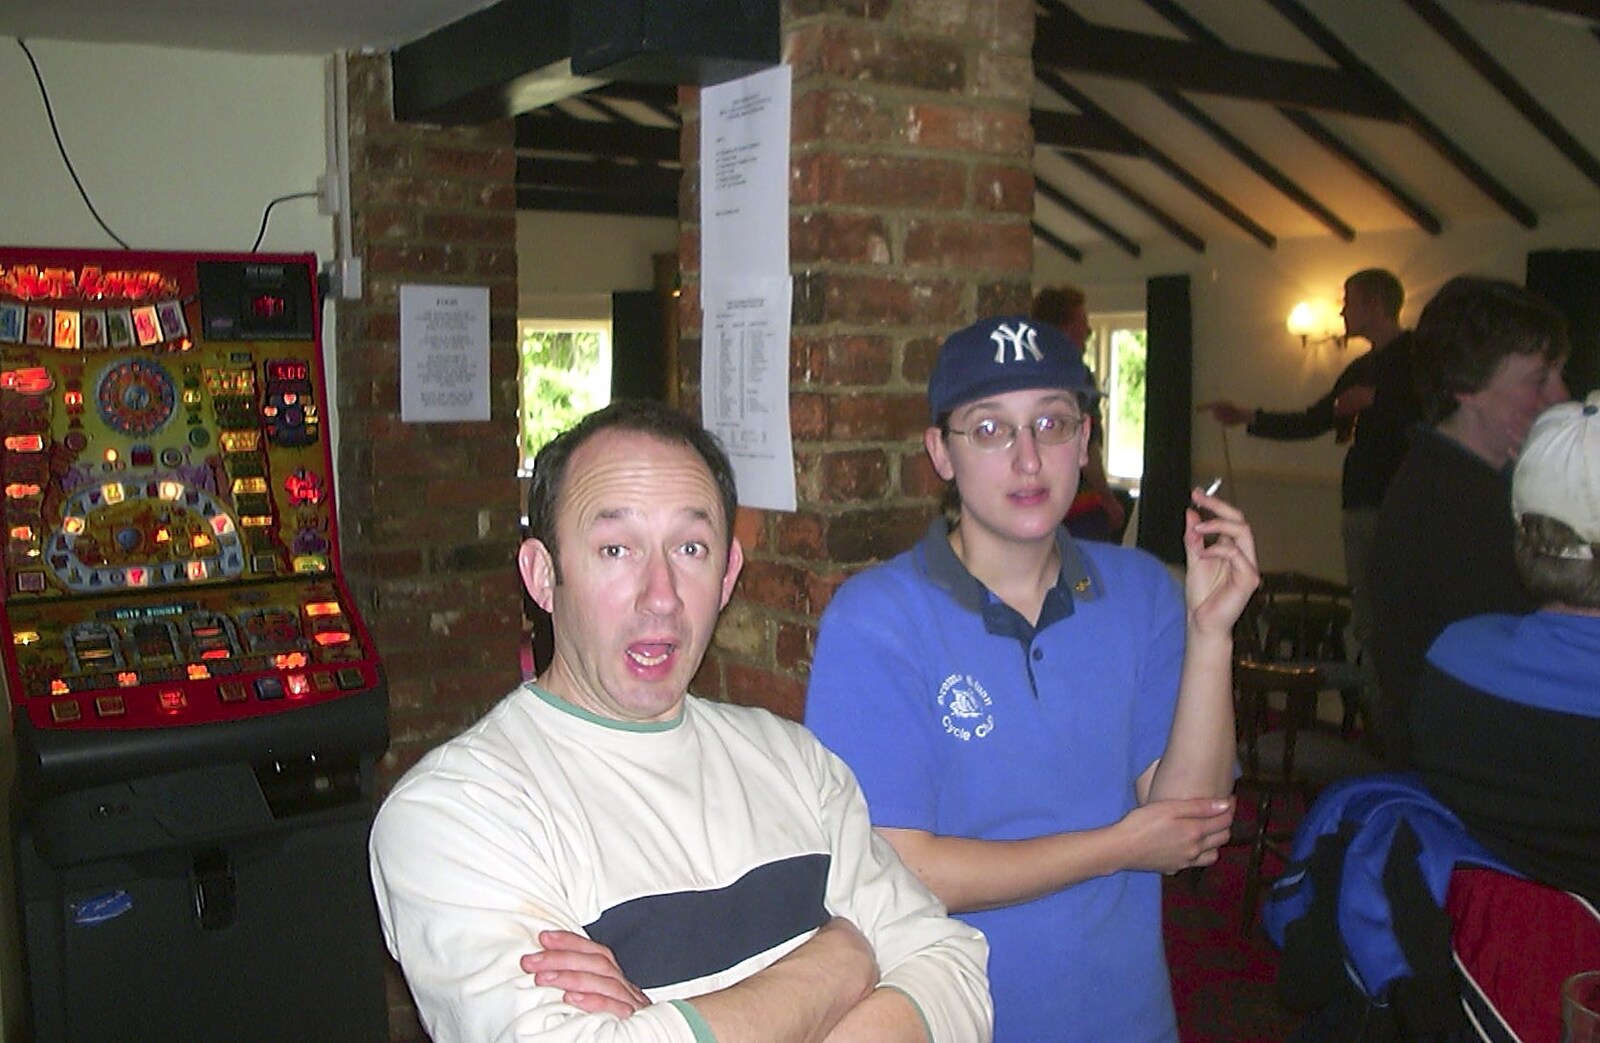 The BSCC Easter Bike Ride, Thelnetham and Redgrave, Suffolk - 10th April 2004: DH looks shocked because Suey has used more than two strands of tobacco